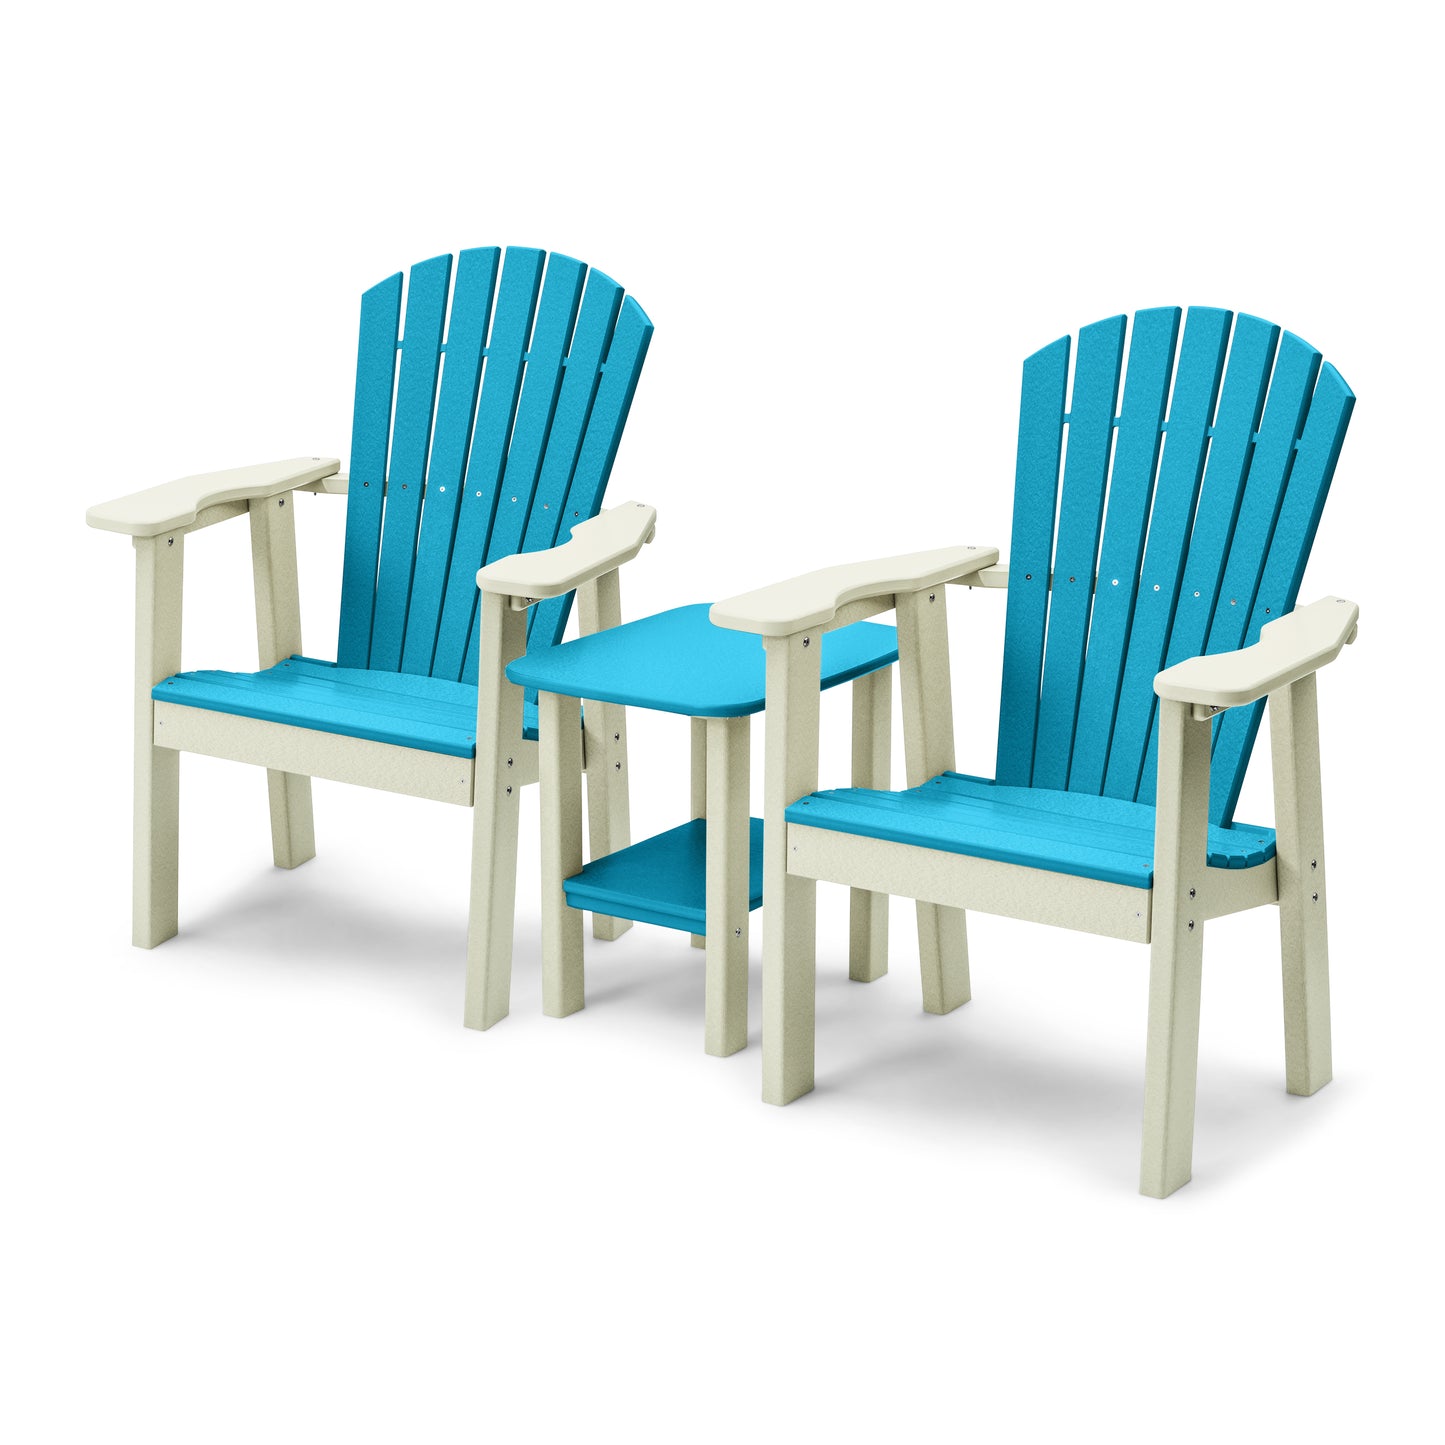 Perfect Choice Recycled Plastic Classic Upright Adirondack Chair Set - LEAD TIME TO SHIP 4 WEEKS OR LESS